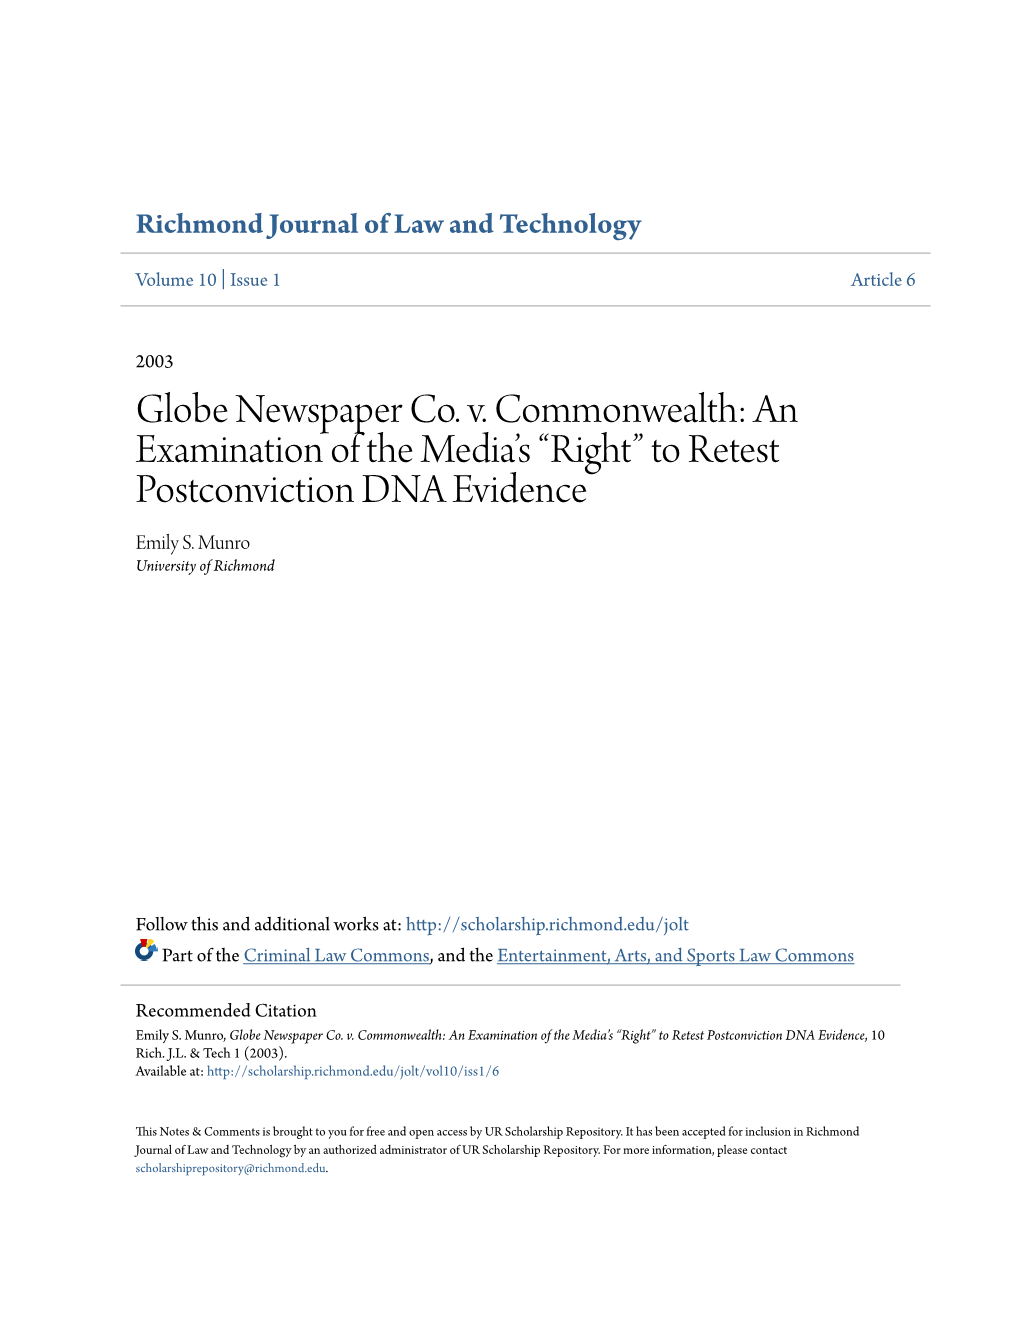 Globe Newspaper Co. V. Commonwealth: an Examination of the Media’S “Right” to Retest Postconviction DNA Evidence Emily S